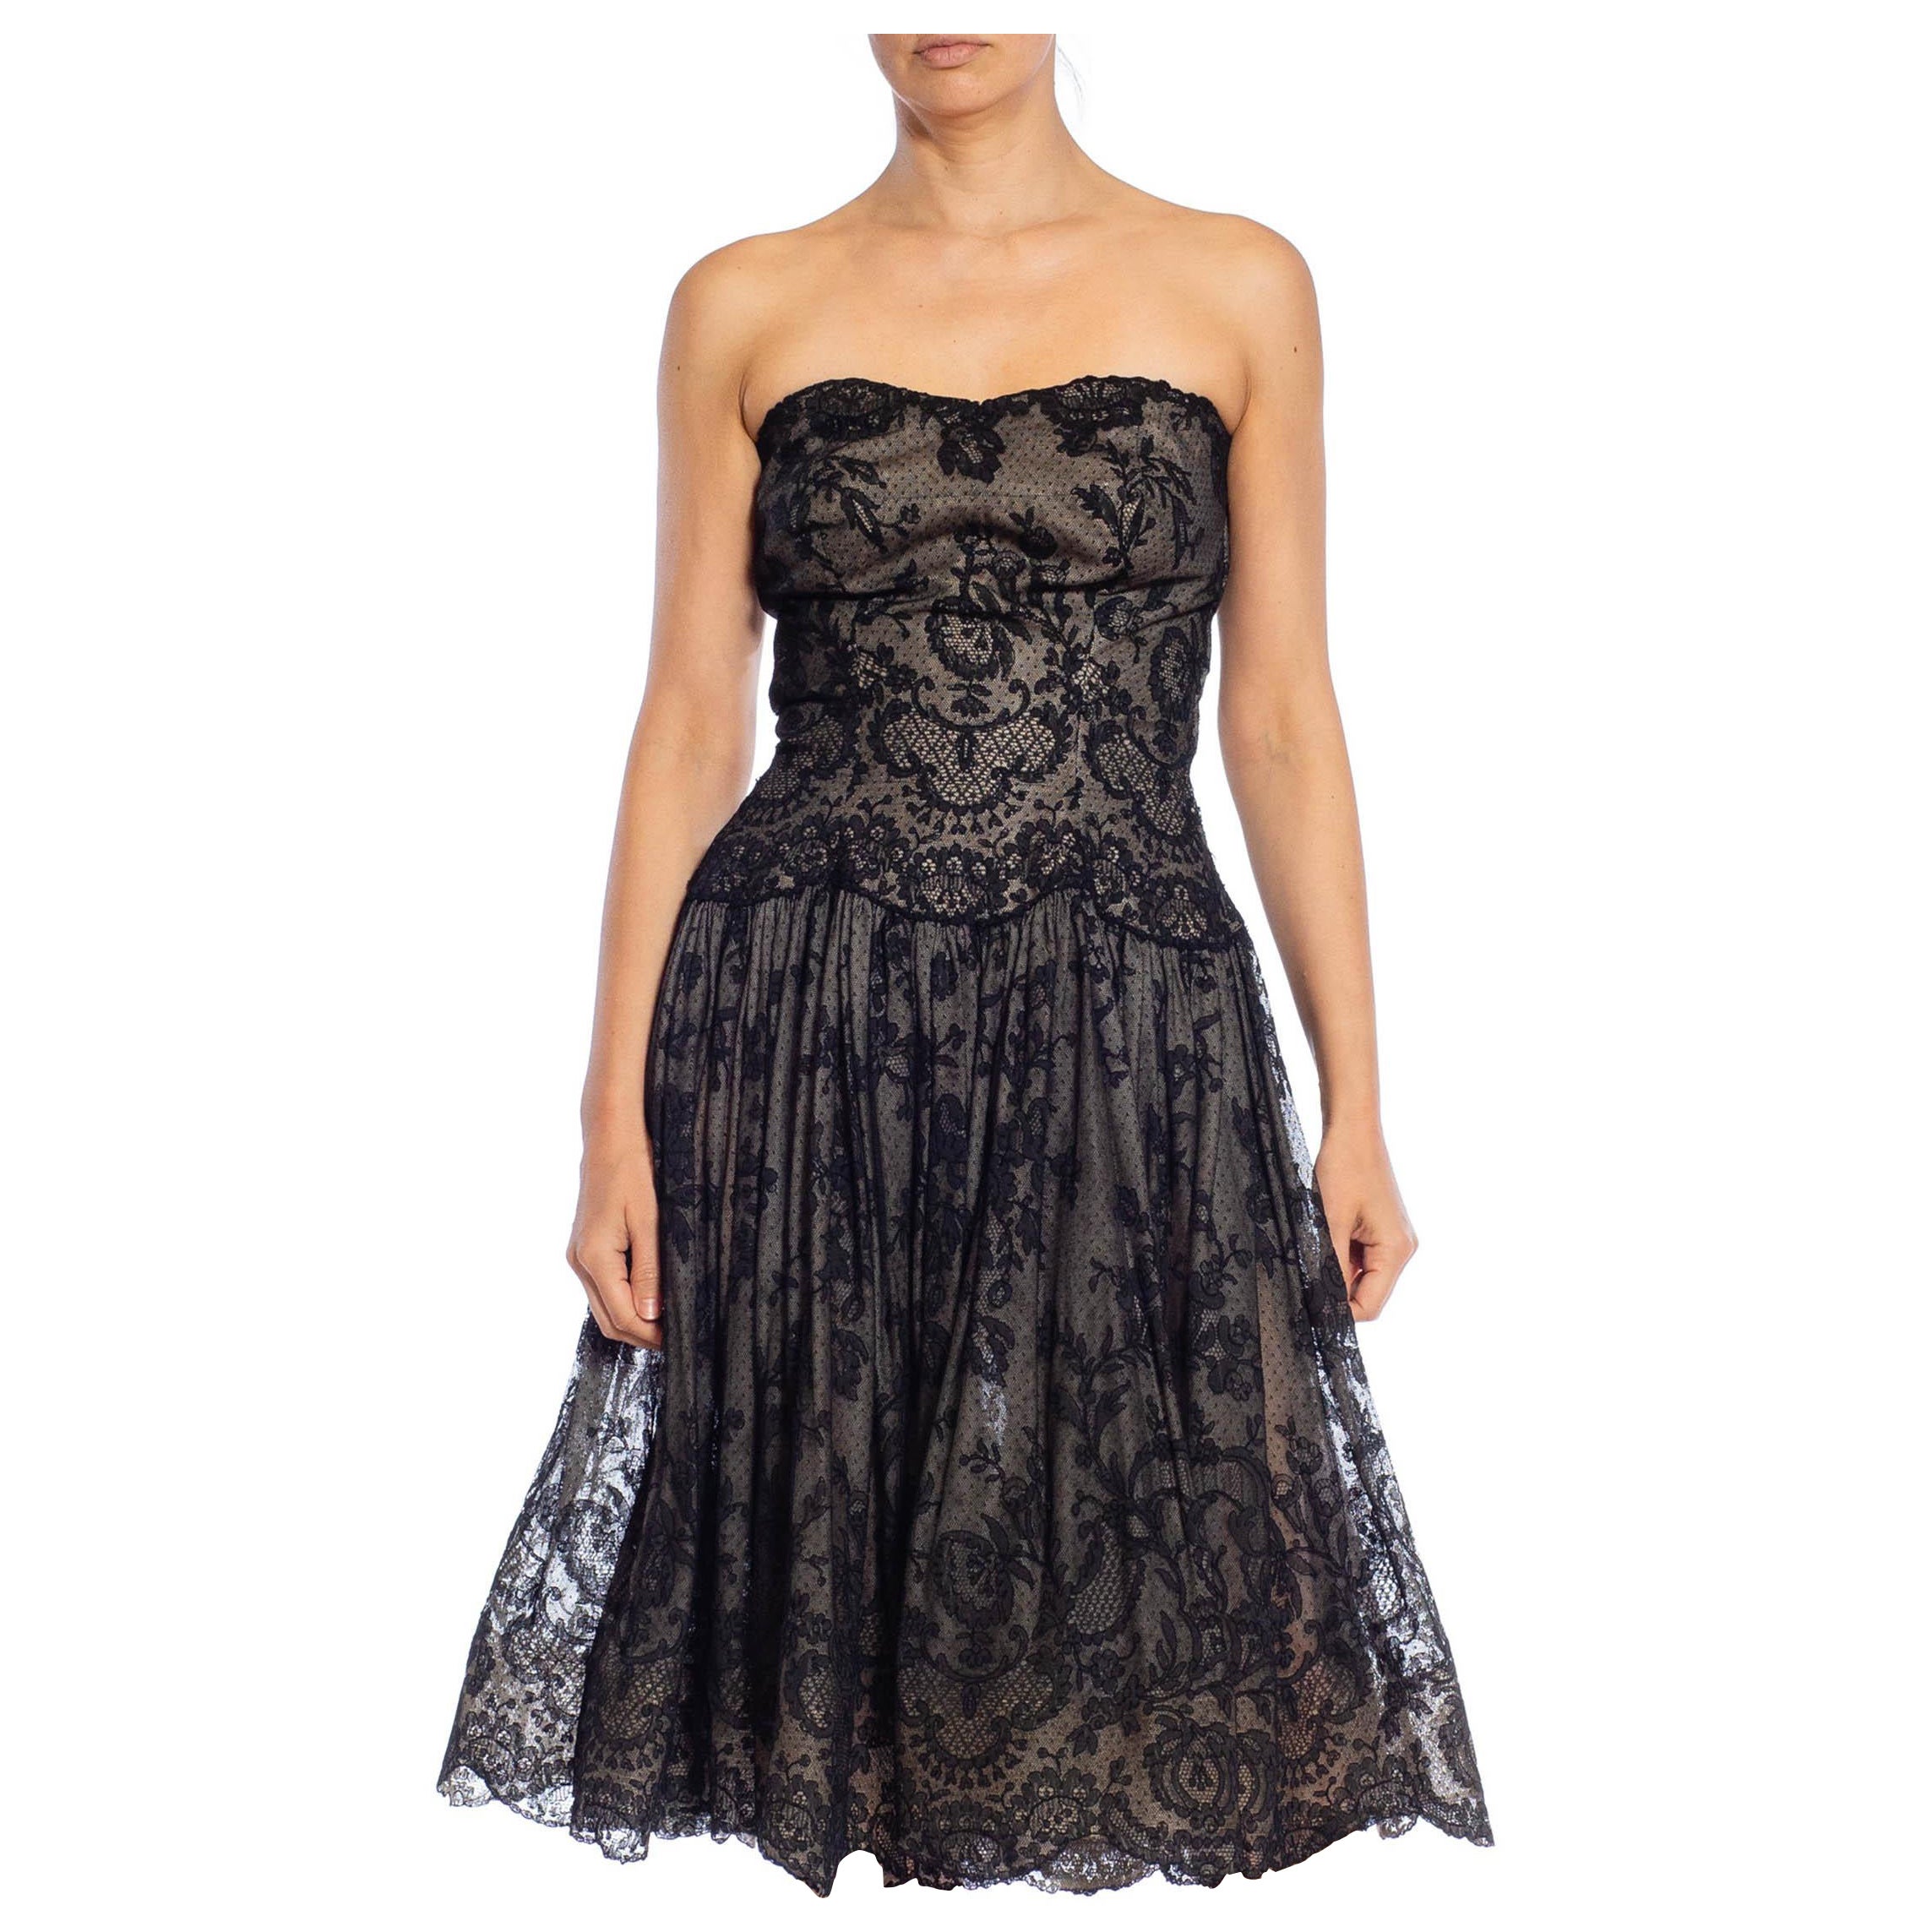 1950S Black Floral Lace Strapless Fit & Flare Cocktail Dress From Paris For Sale